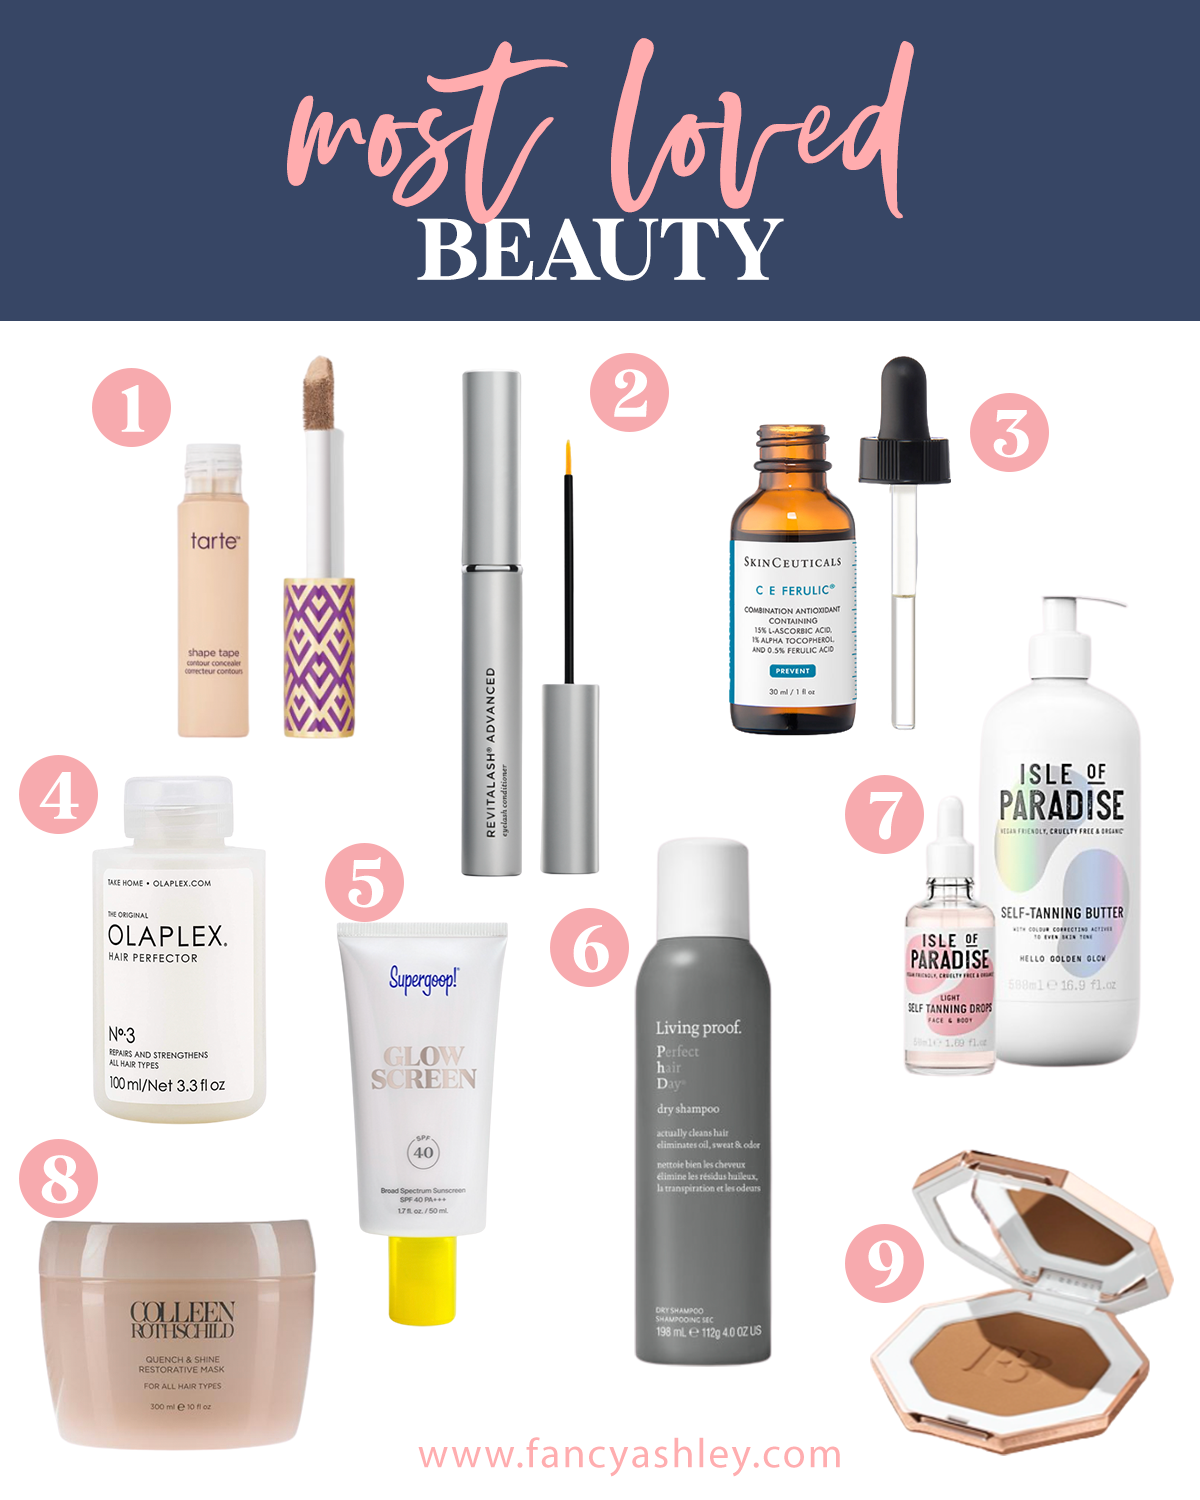 Like To Know It by popular Houston life and style blog, Fancy Ashley: collage image of tarte concealer, lash serum, face oil, olaplex shampoo, supergoop glow screen, living proof dry shampoo, bronzer, isle of paradise self tanning drops and lotion, and Colleen Rothschild face moisturizer.  